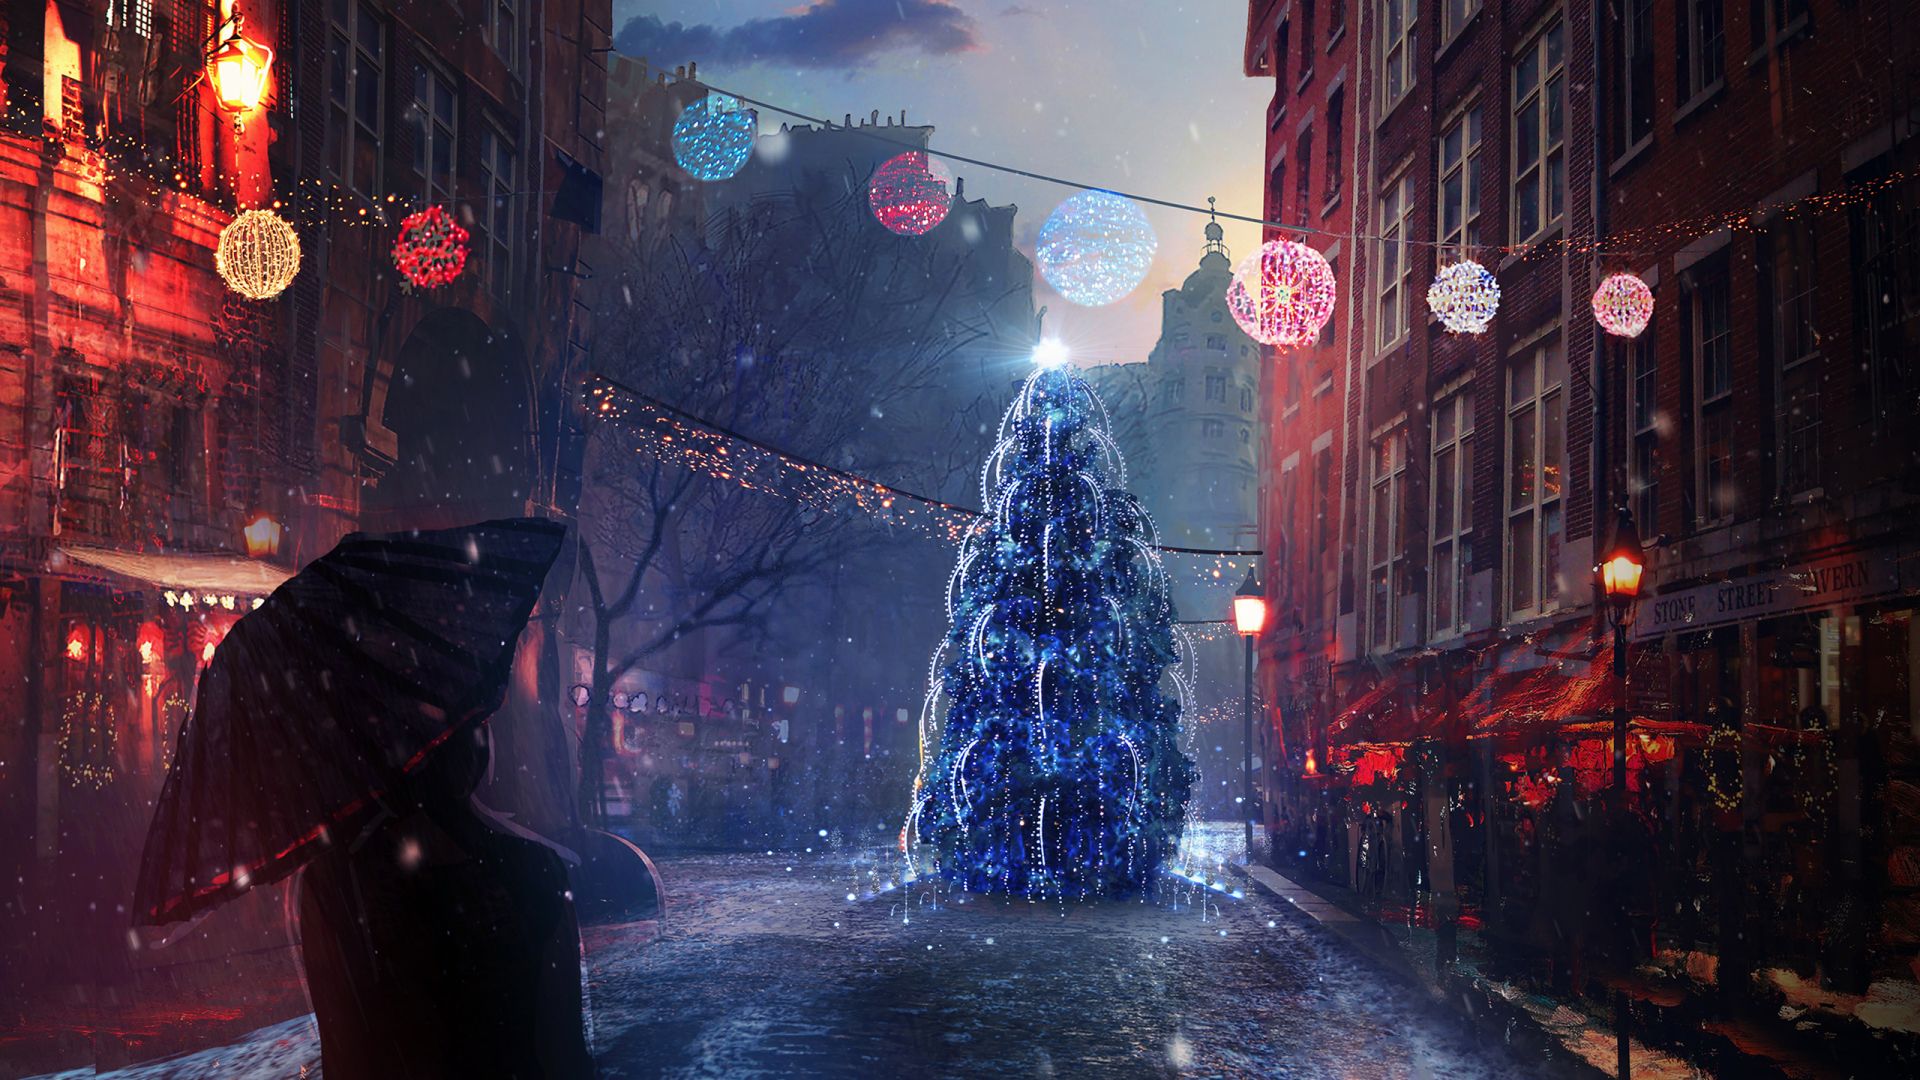 Christmas Eve Lights wallpaper in 1920x1080 resolution